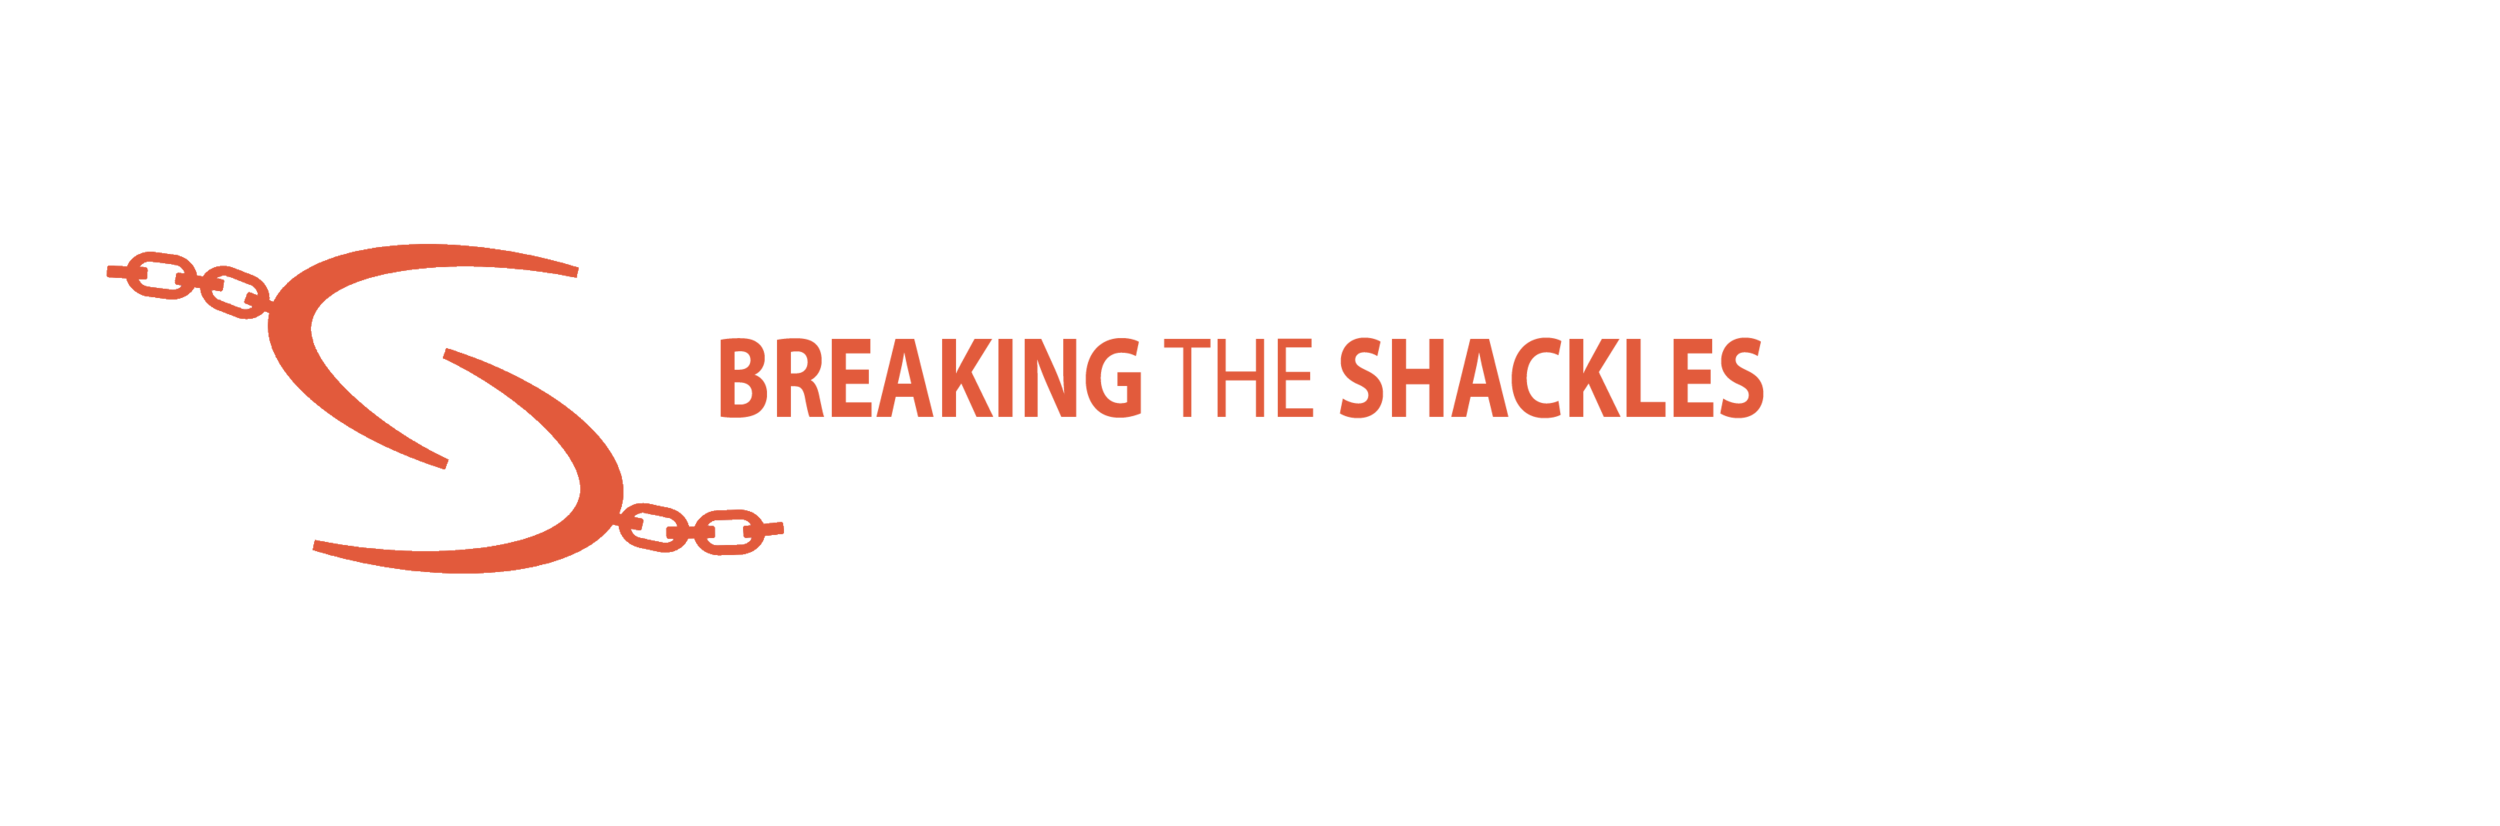 Breaking the Shackles